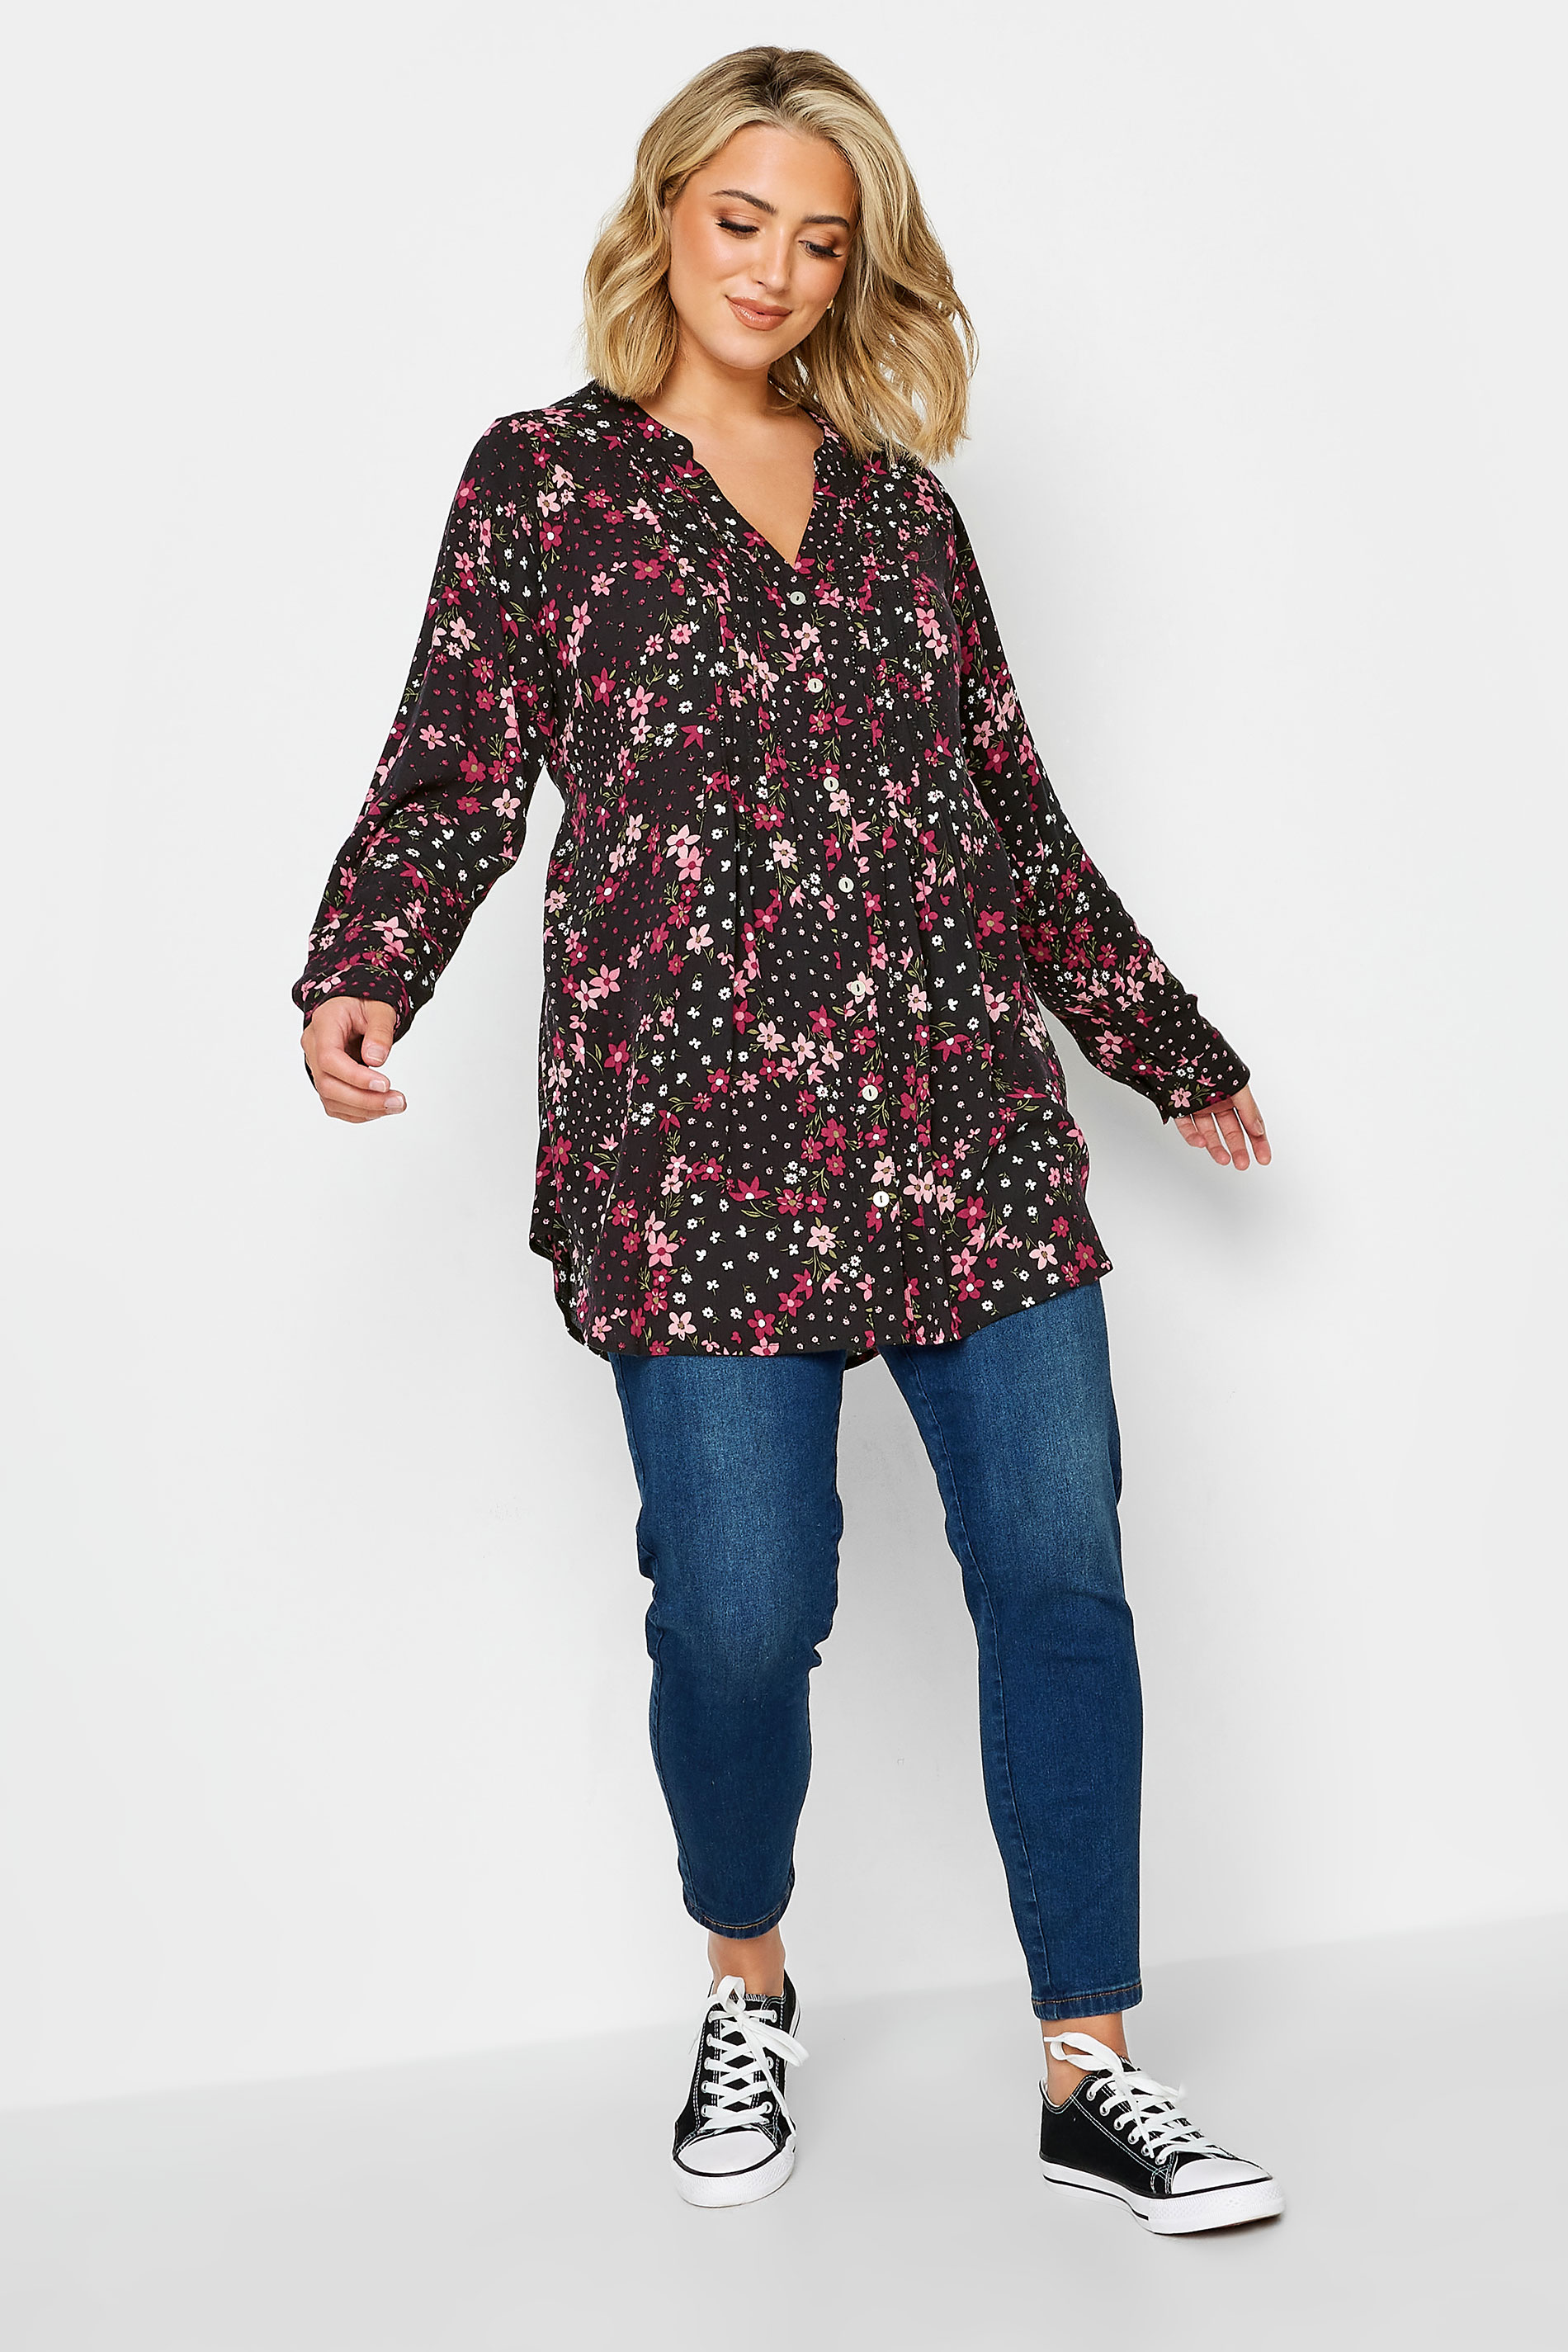 YOURS Curve Plus Size Black Floral Pintuck Shirt | Yours Clothing  2